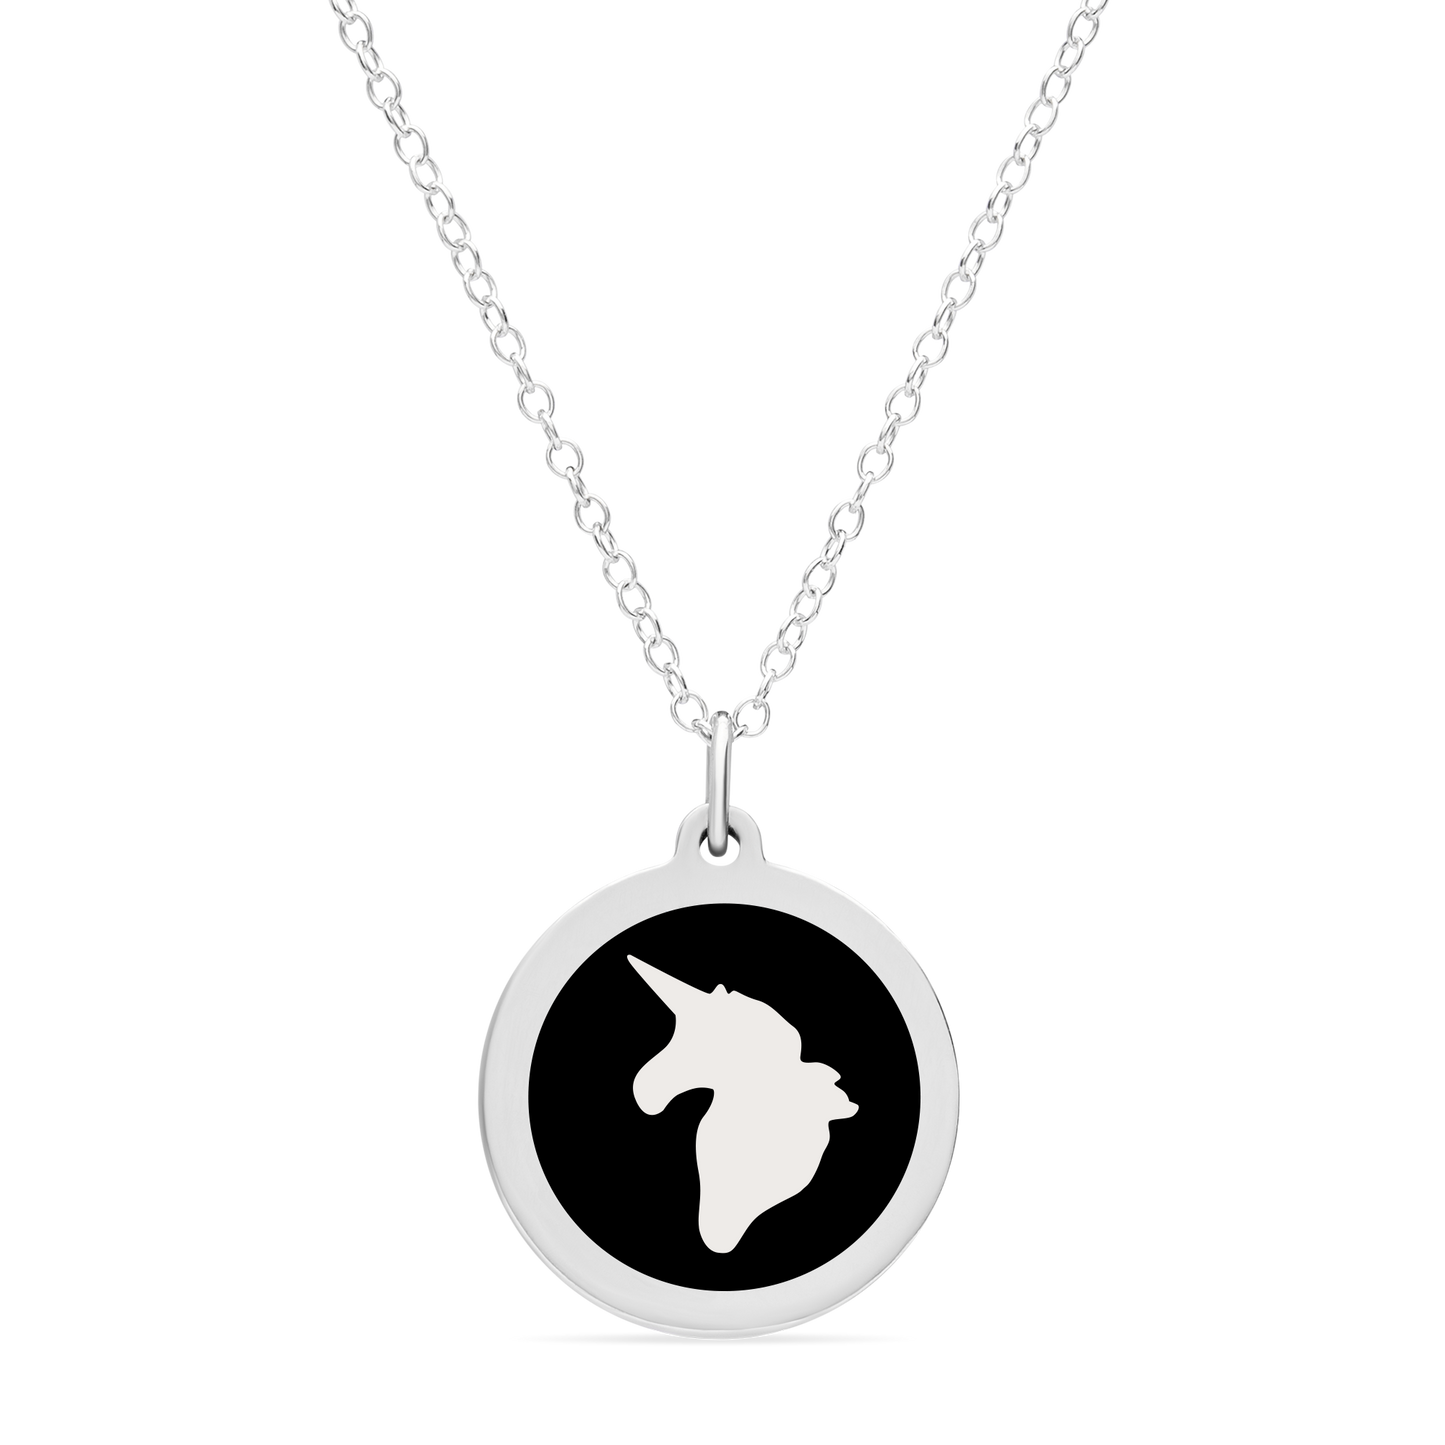 ORIGINAL UNICORN CHARM in sterling silver with rhodium plate